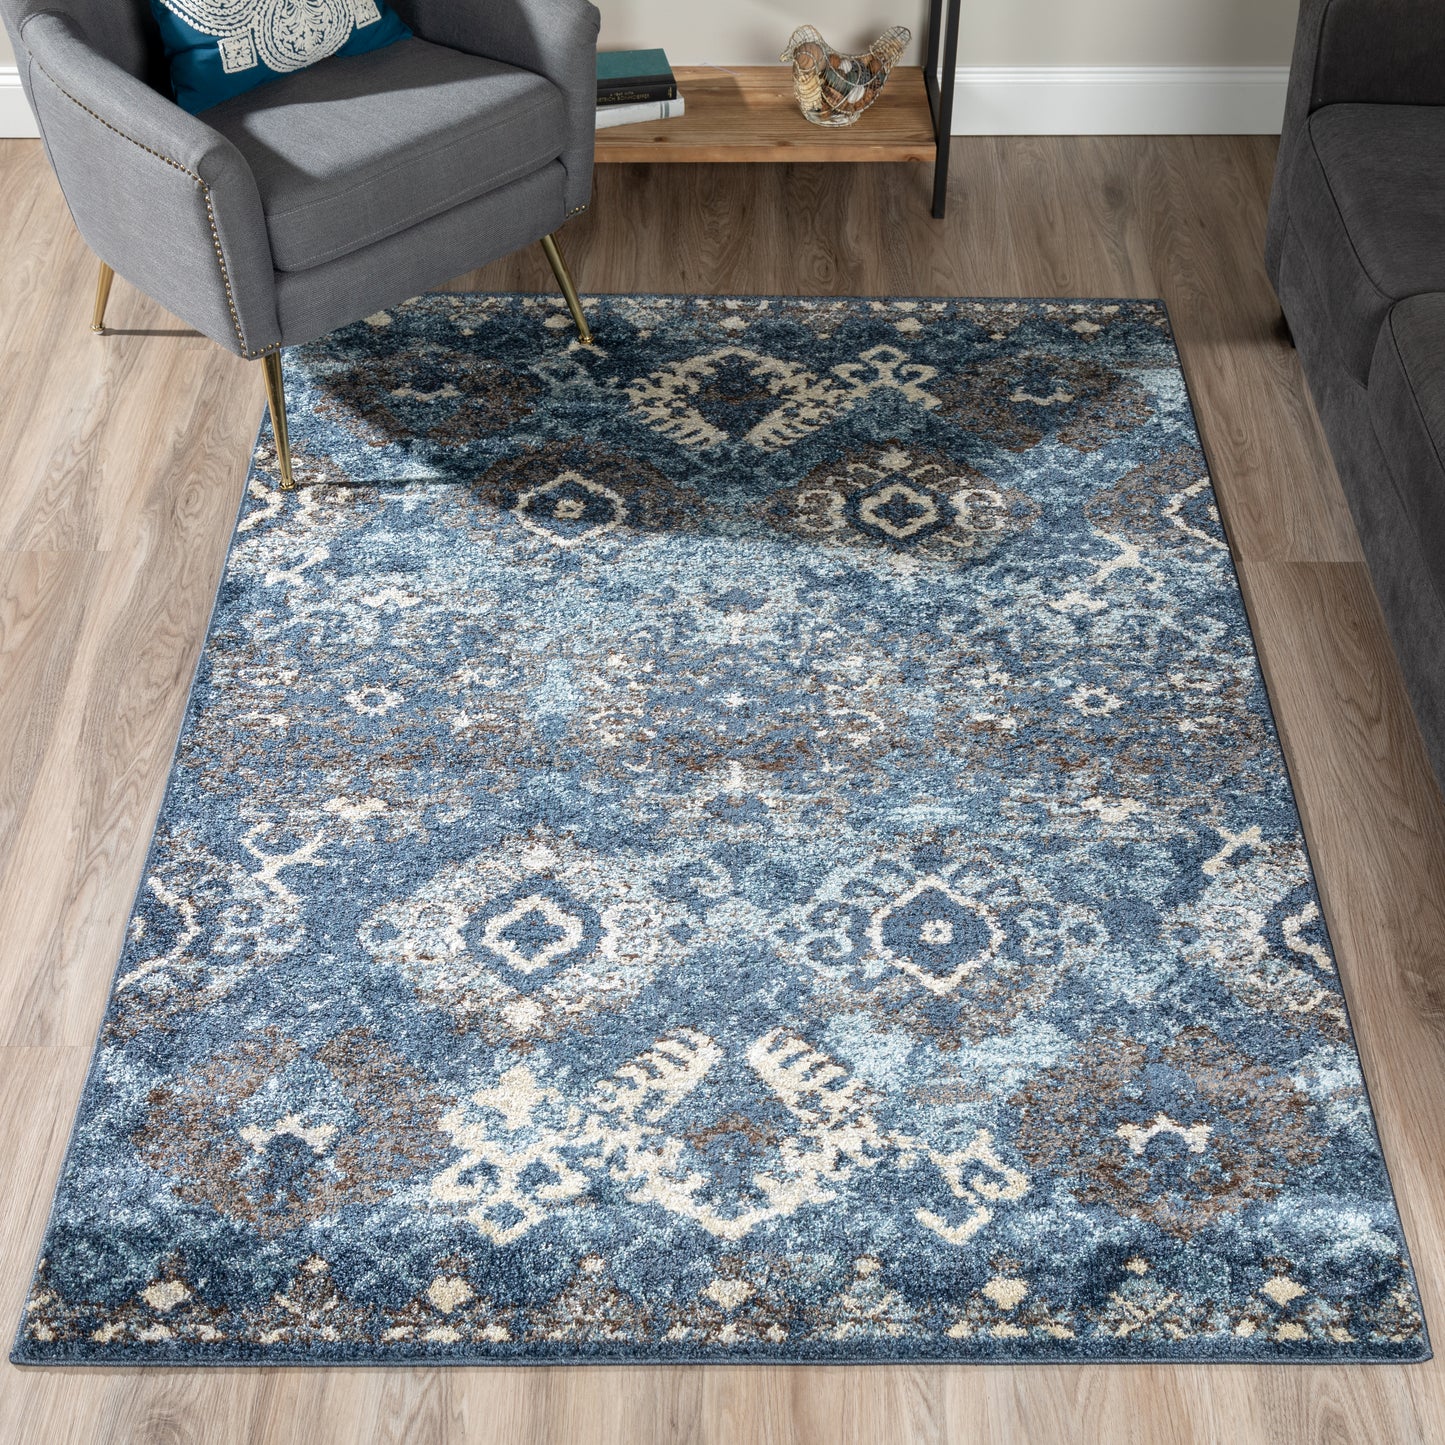 Gala GA10 Power Woven Synthetic Blend Indoor Area Rug by Dalyn Rugs